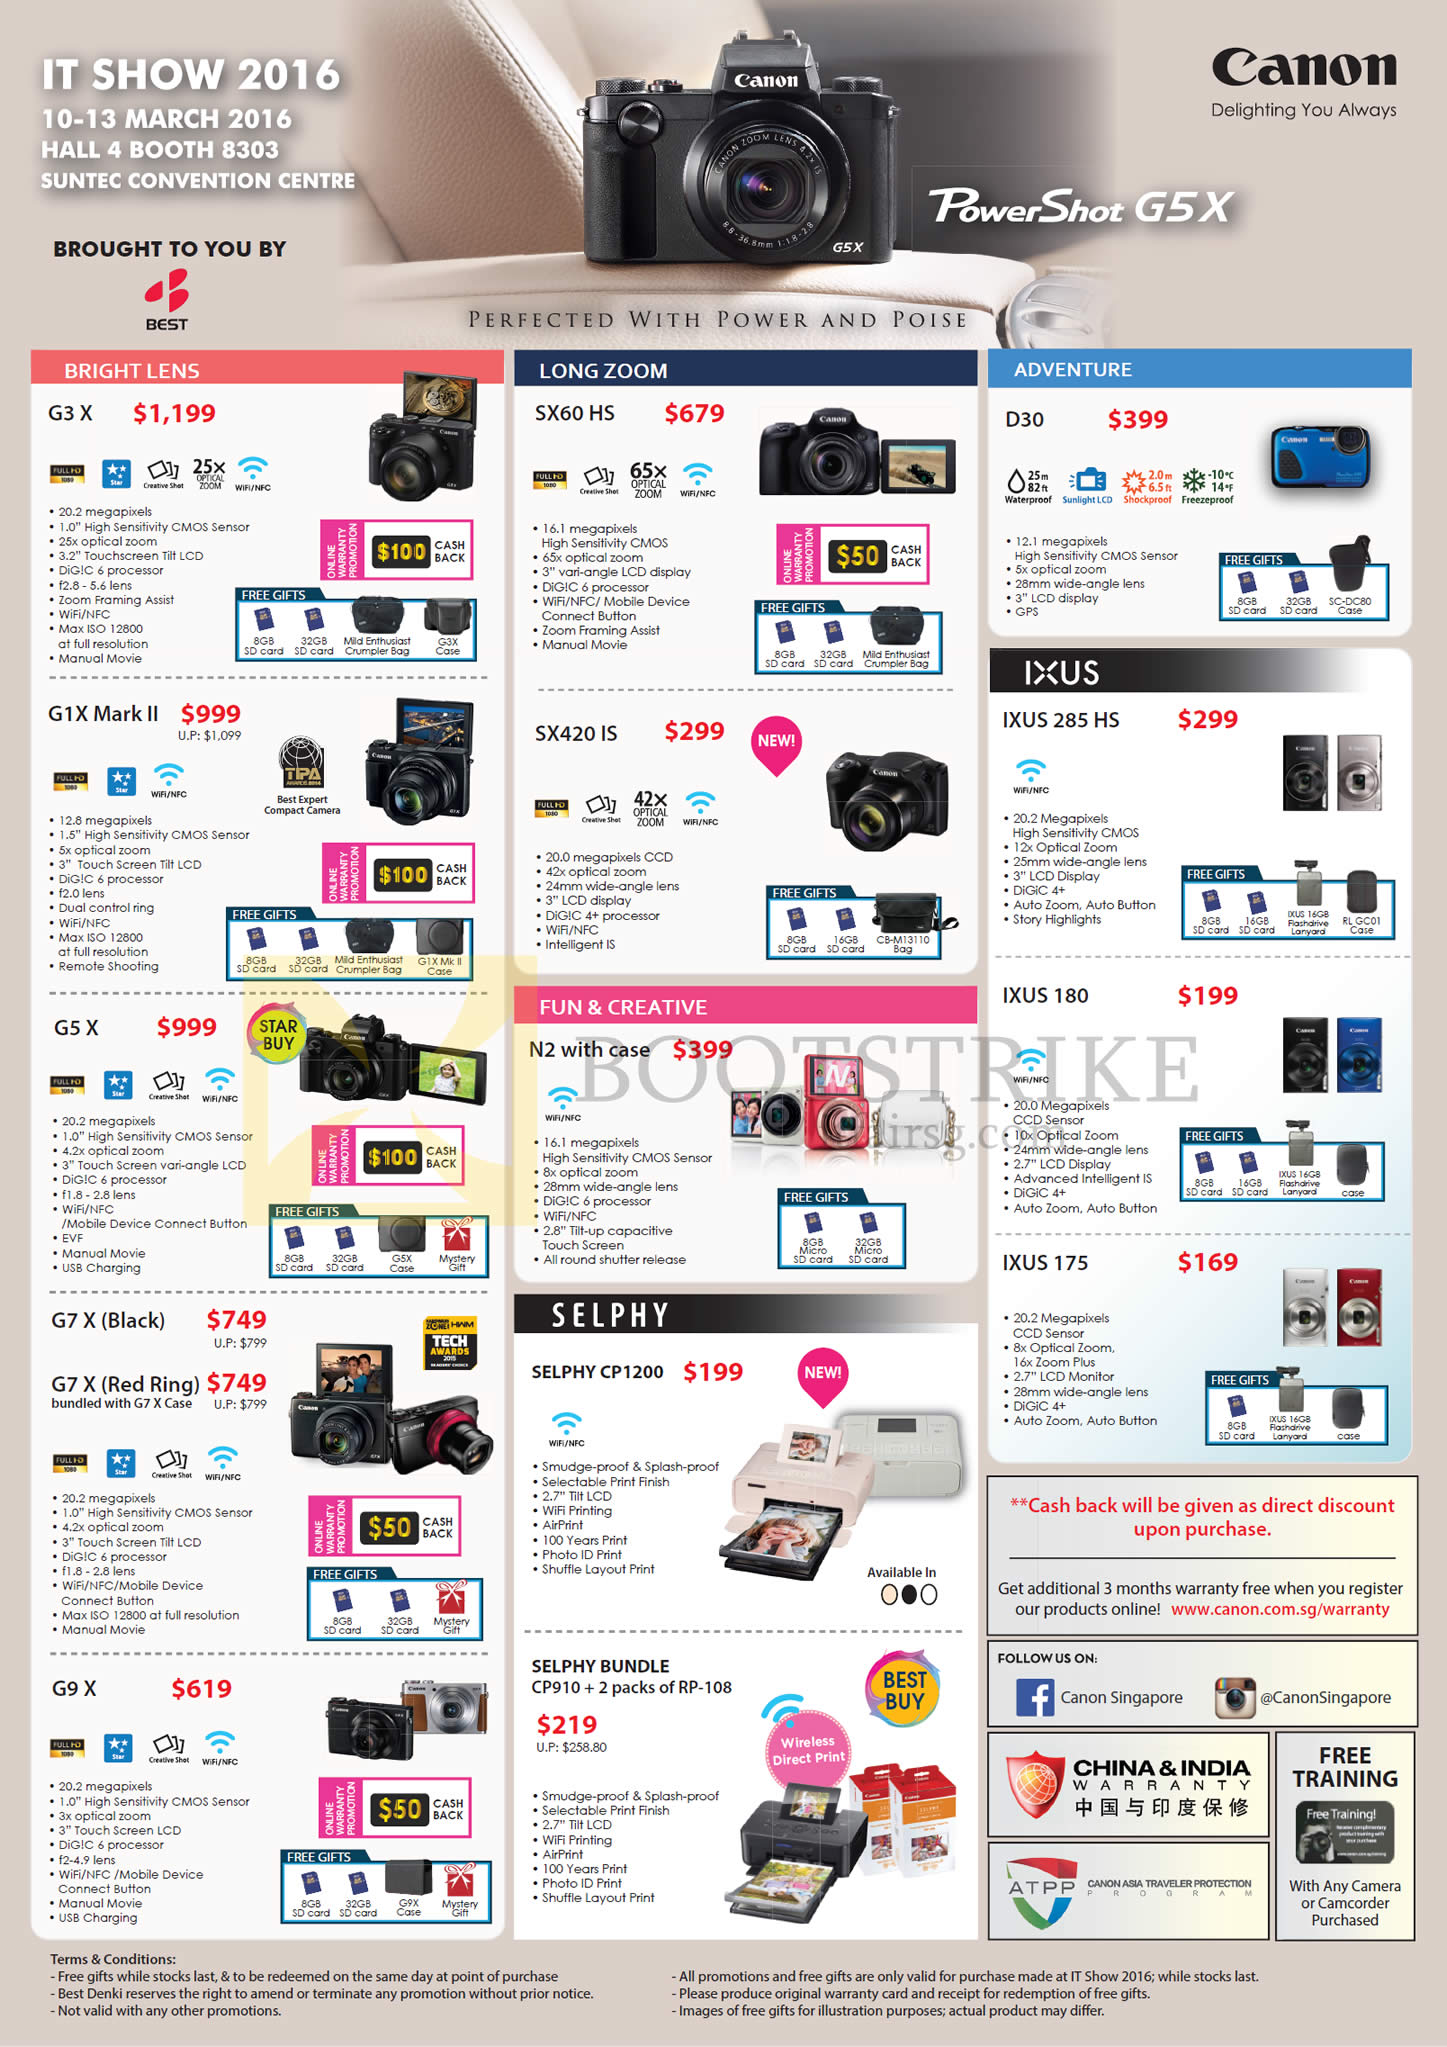 IT SHOW 2016 price list image brochure of Canon Digital Cameras, Printers, G3 X, G1X Mark II, G5X, G7X, G9X, SX60 HS, SX420 IS, N2, D30, IXUS 285 HS, 180, 175, Selphy CP1200, CP910